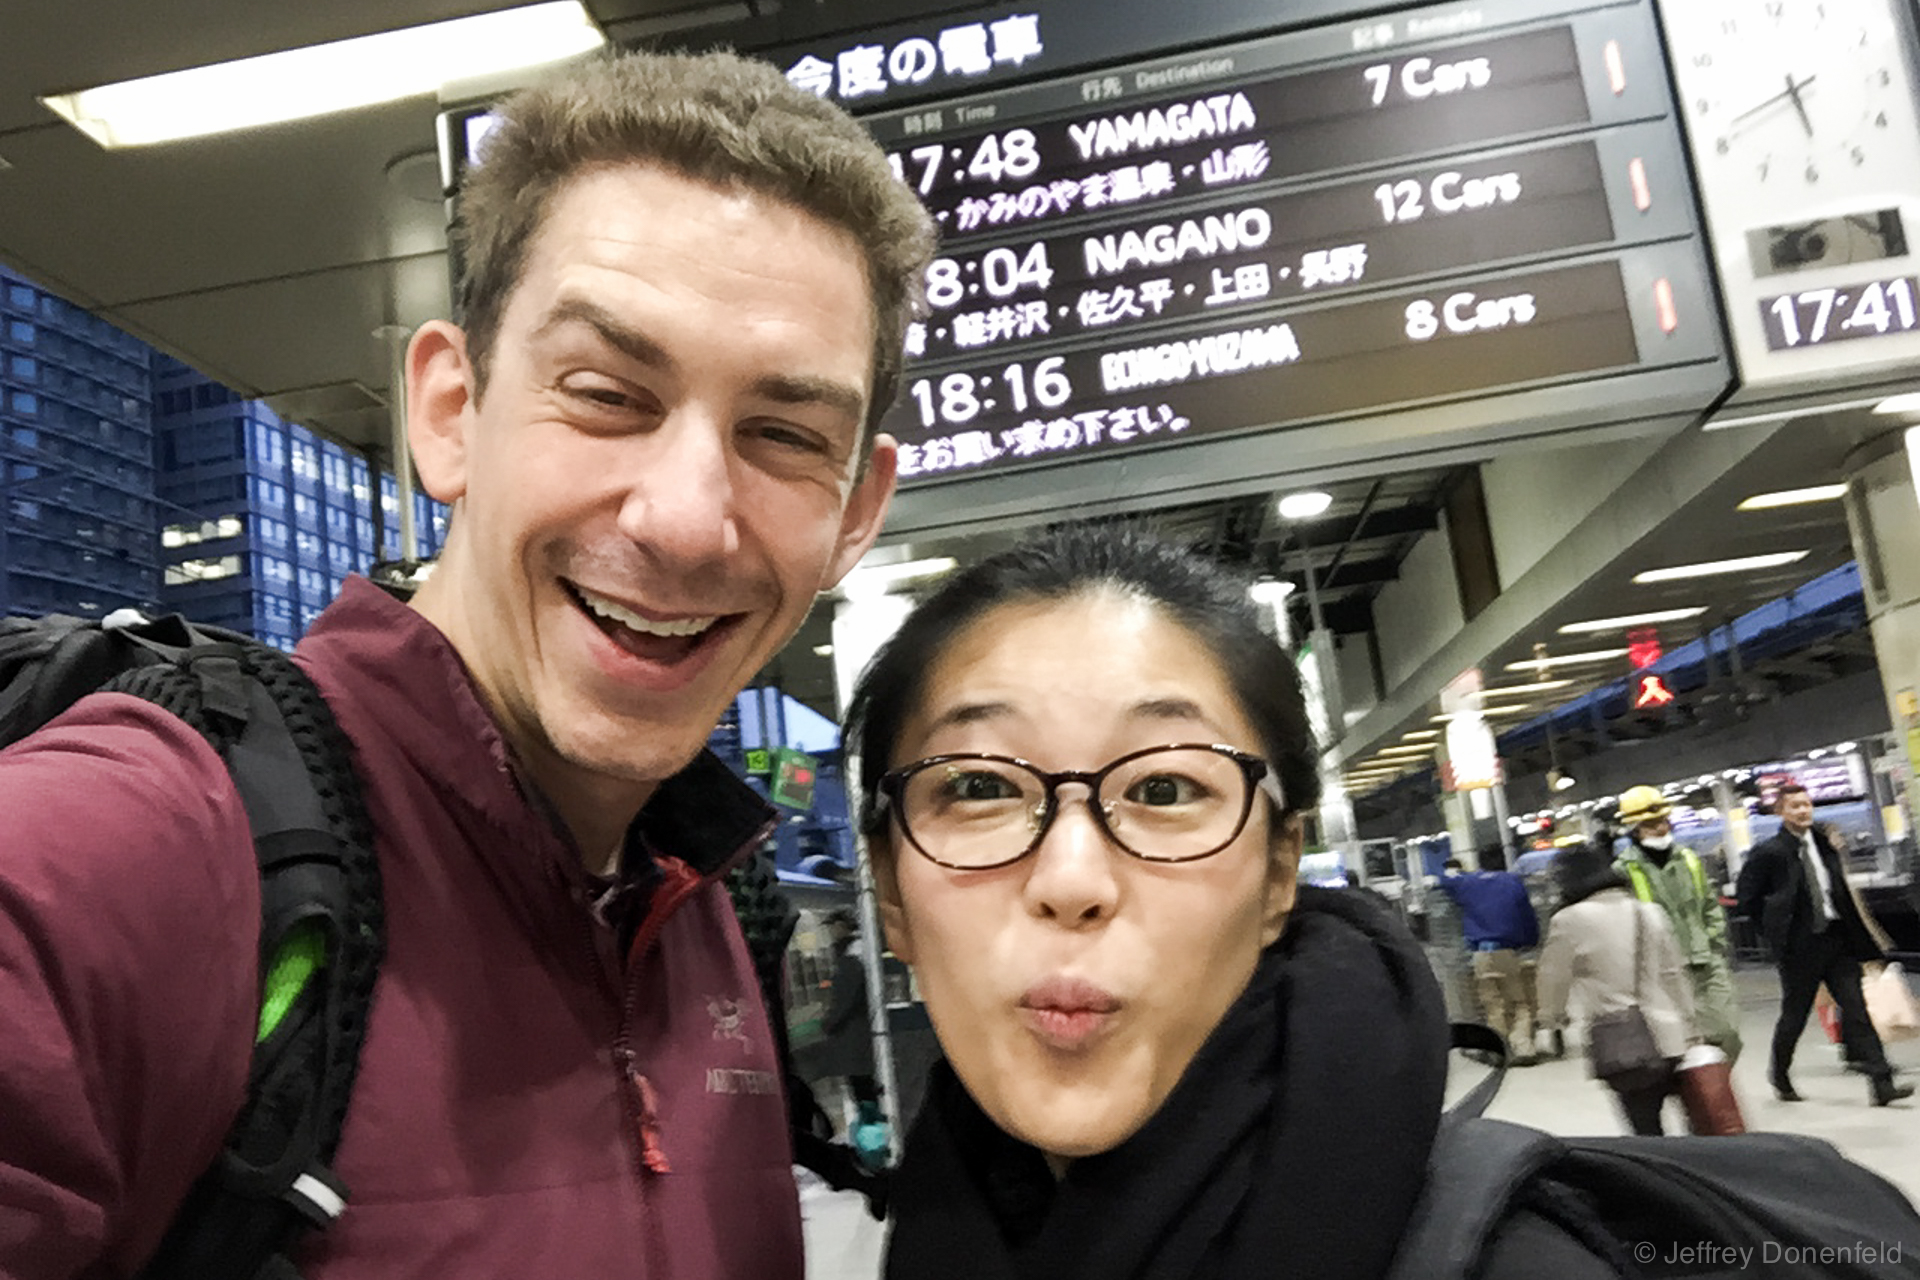 Saori and I were introduced by a mutual friend, and met up in Tokyo at the main Tokyo train station. To save on time, and have an awesome ride, we took a Shinkansen bullet train from Tokyo to Nagano - fast and comfortable!